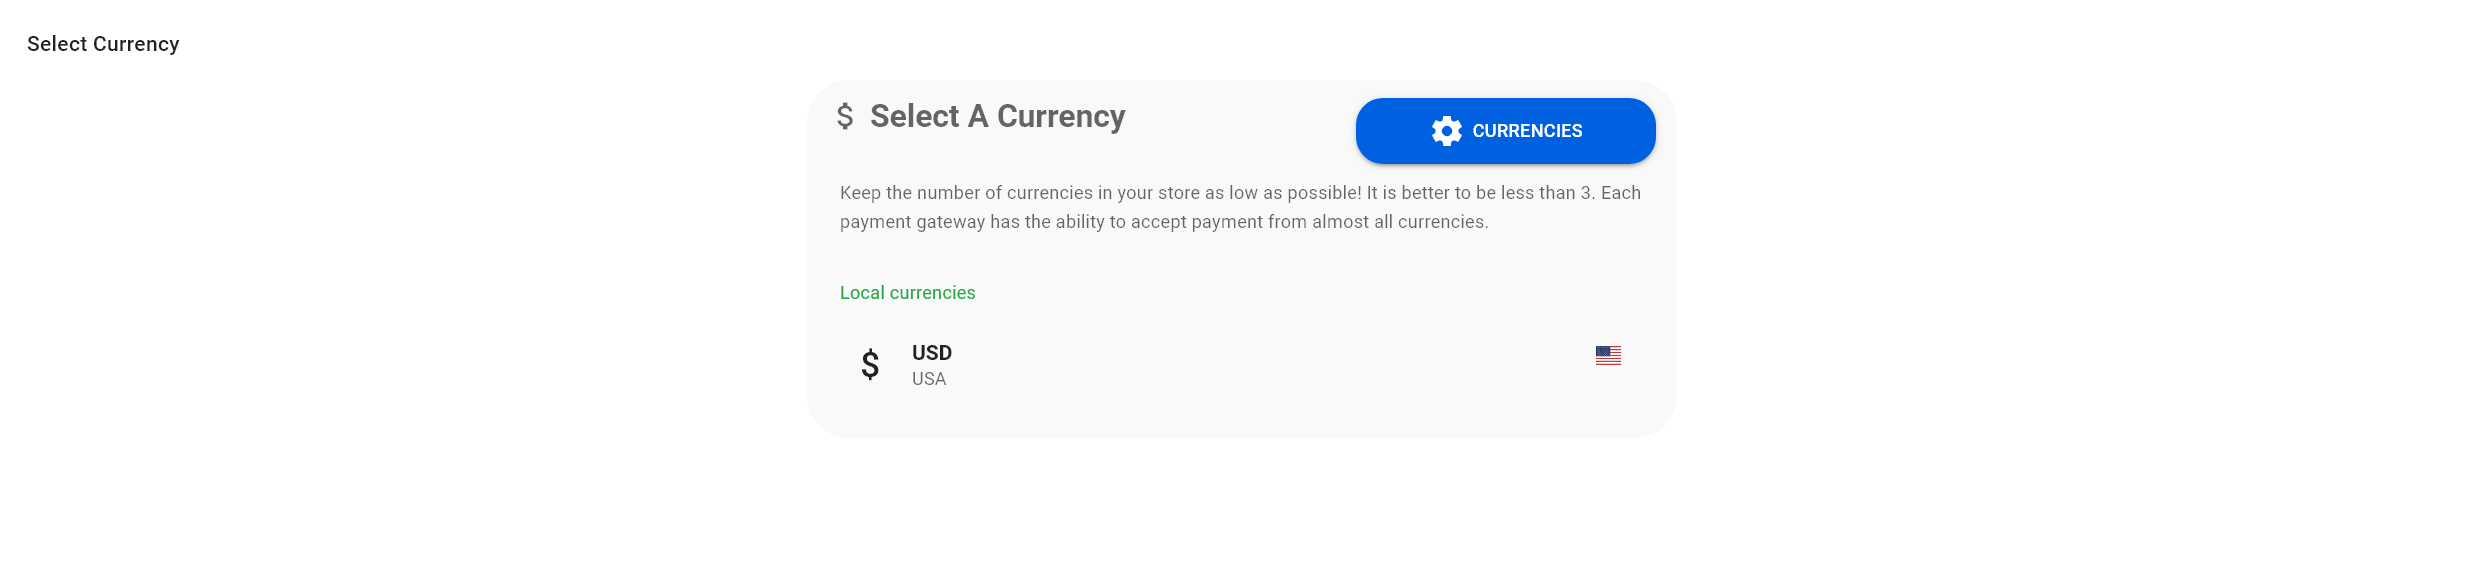 Add payment service > Select currency